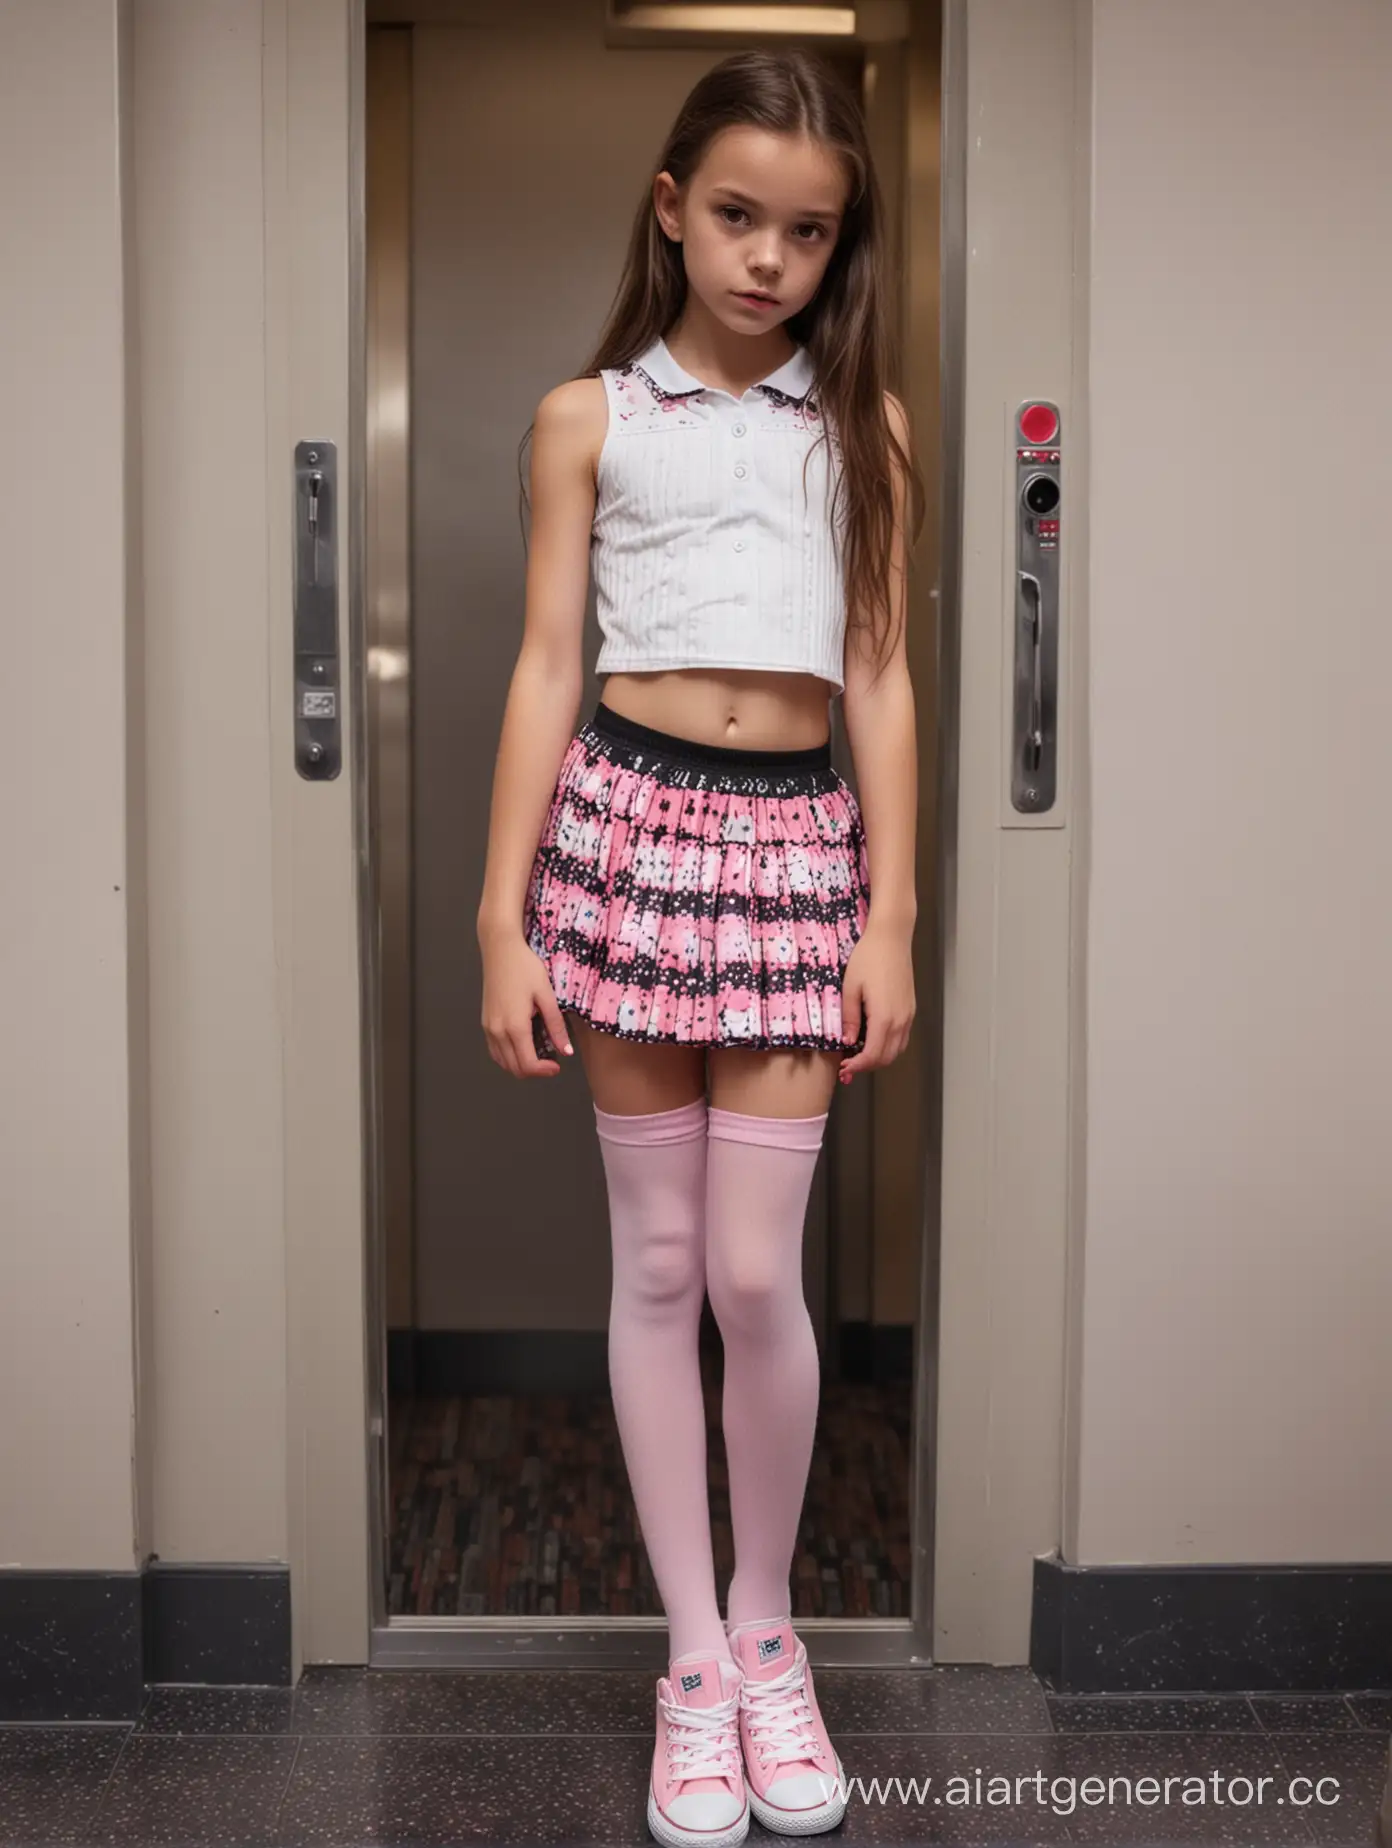 Extremely skinny little girl, 12 years old, kid style patterned crop top, pleated mini skirt, mixed pink and white colors knee above high socks, mini converse shoes, in the elevator, very low light, sad, soft eyes, pursing lips, from front, close up, slim pink lips, full screen focused girl